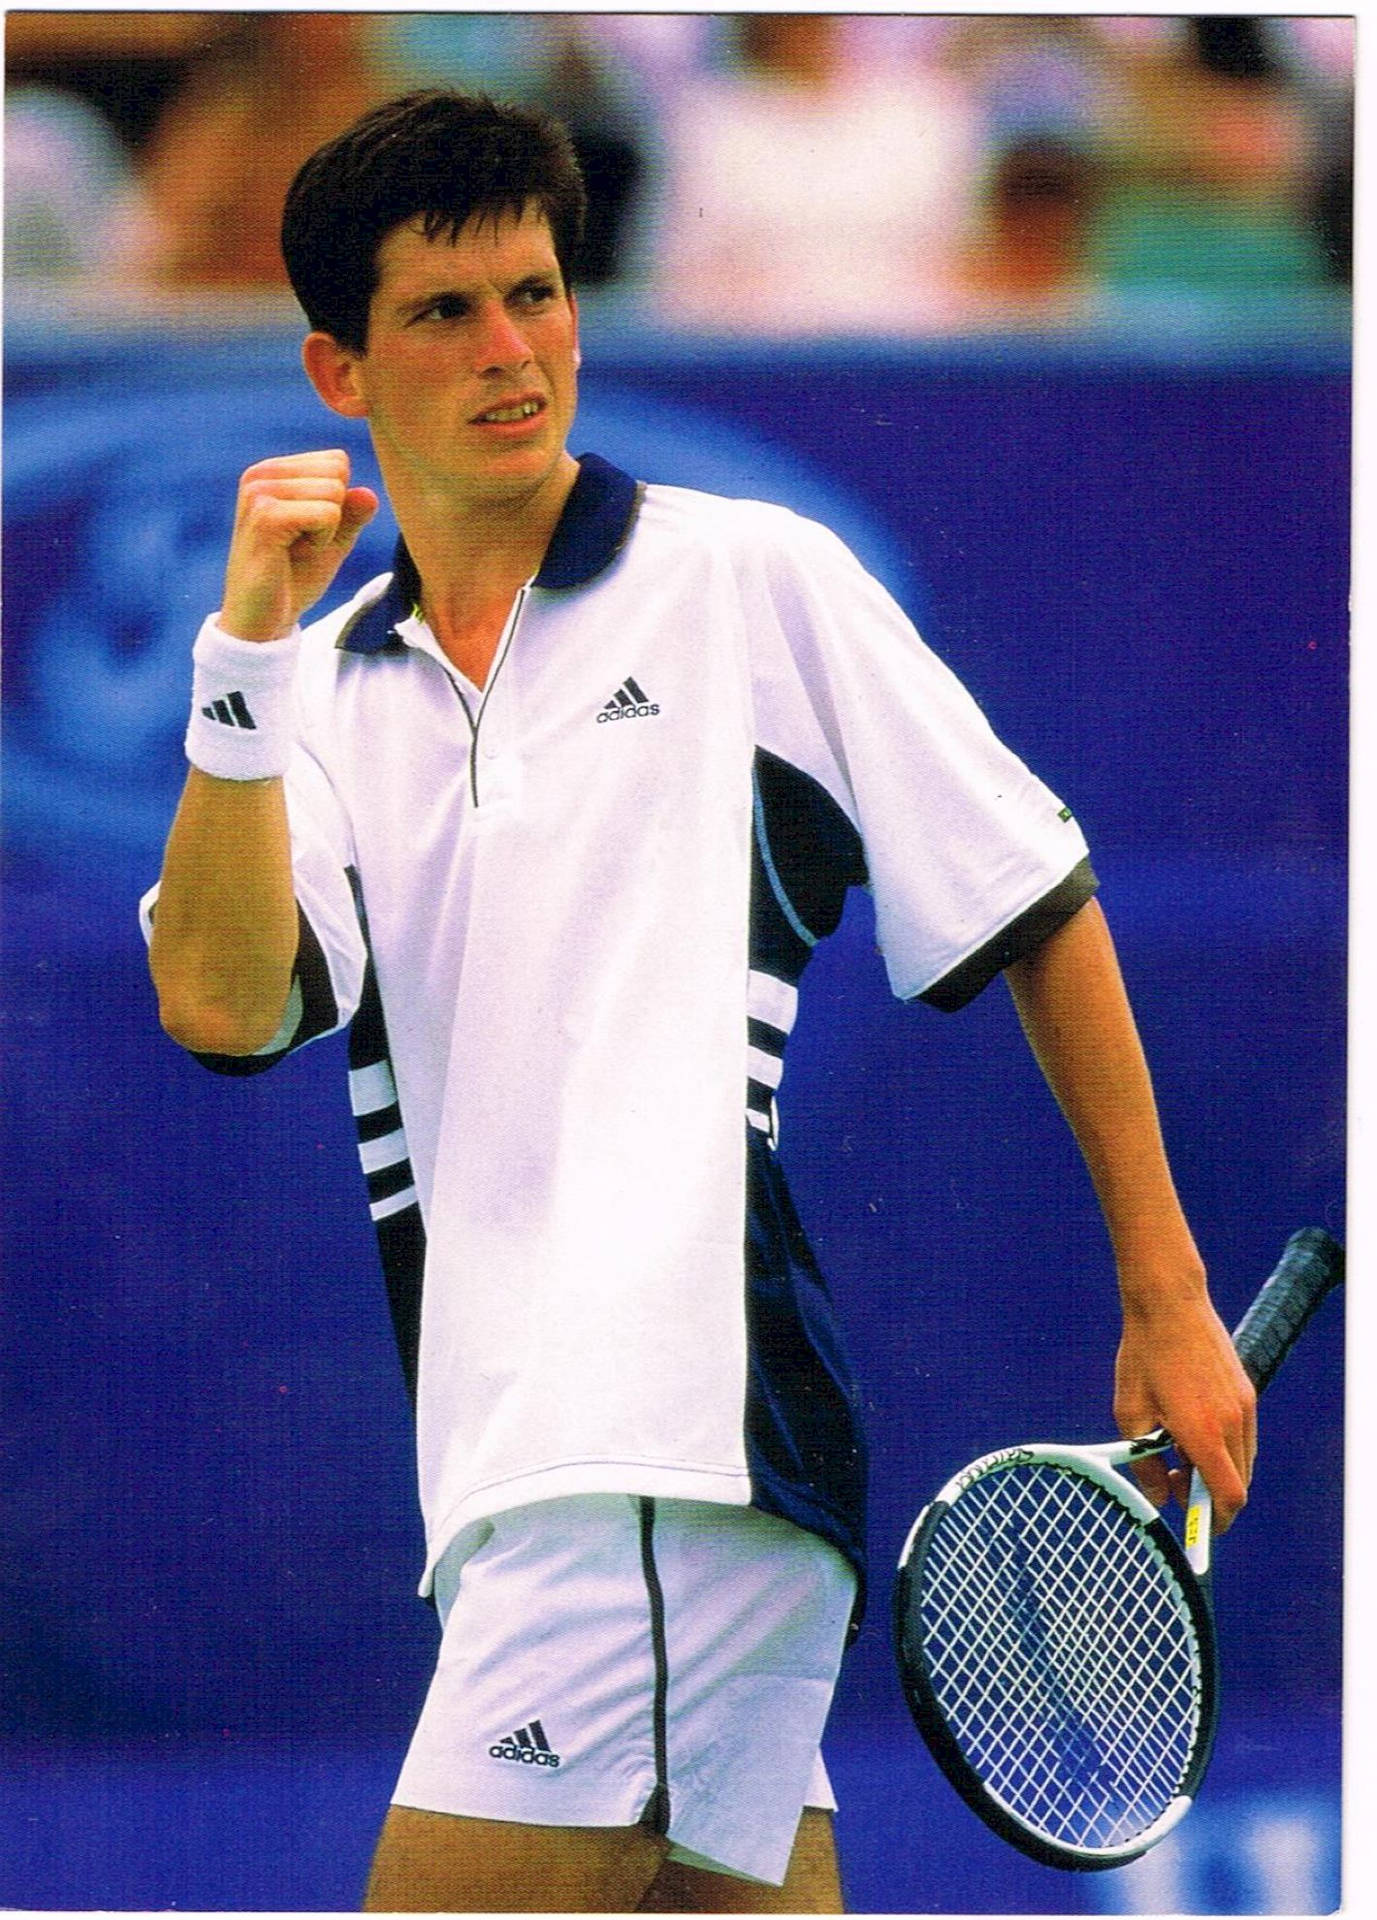 Young Tim Henman celebrating a victory on tennis court Wallpaper